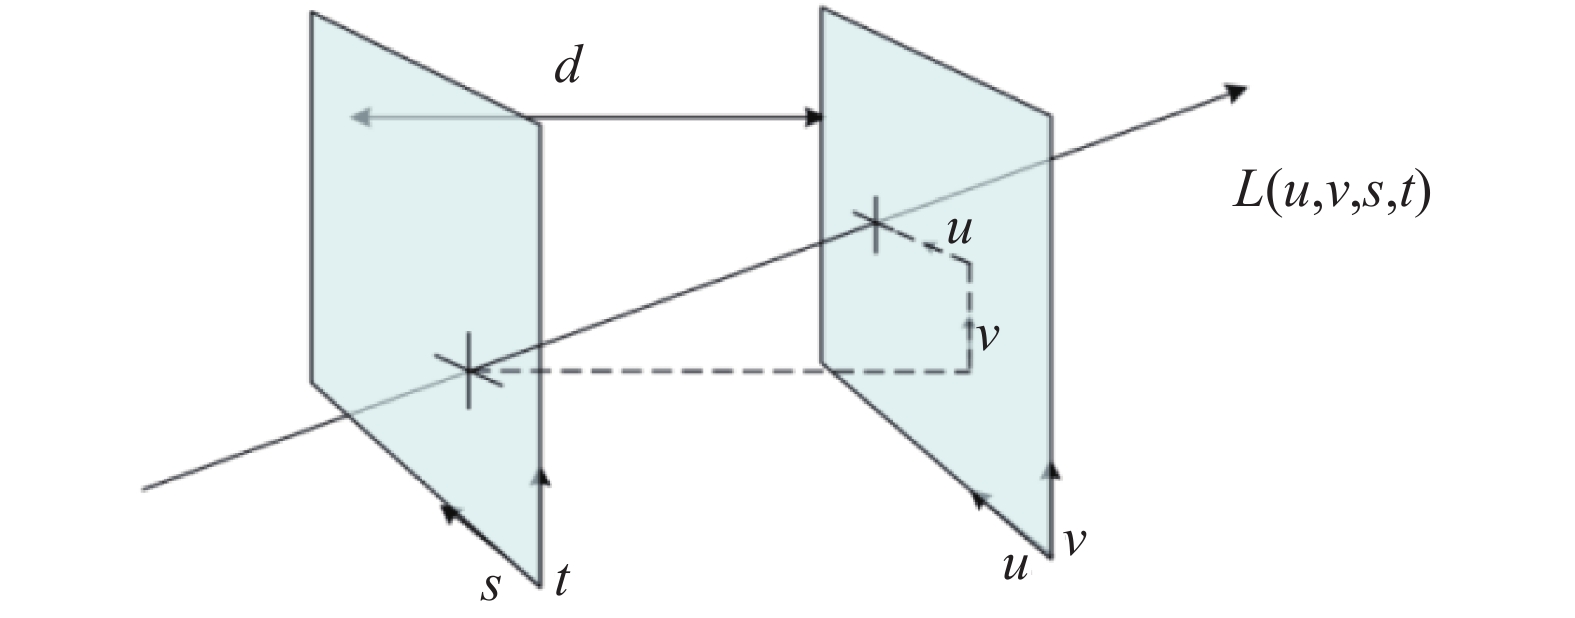 Parameterized representation of two planes